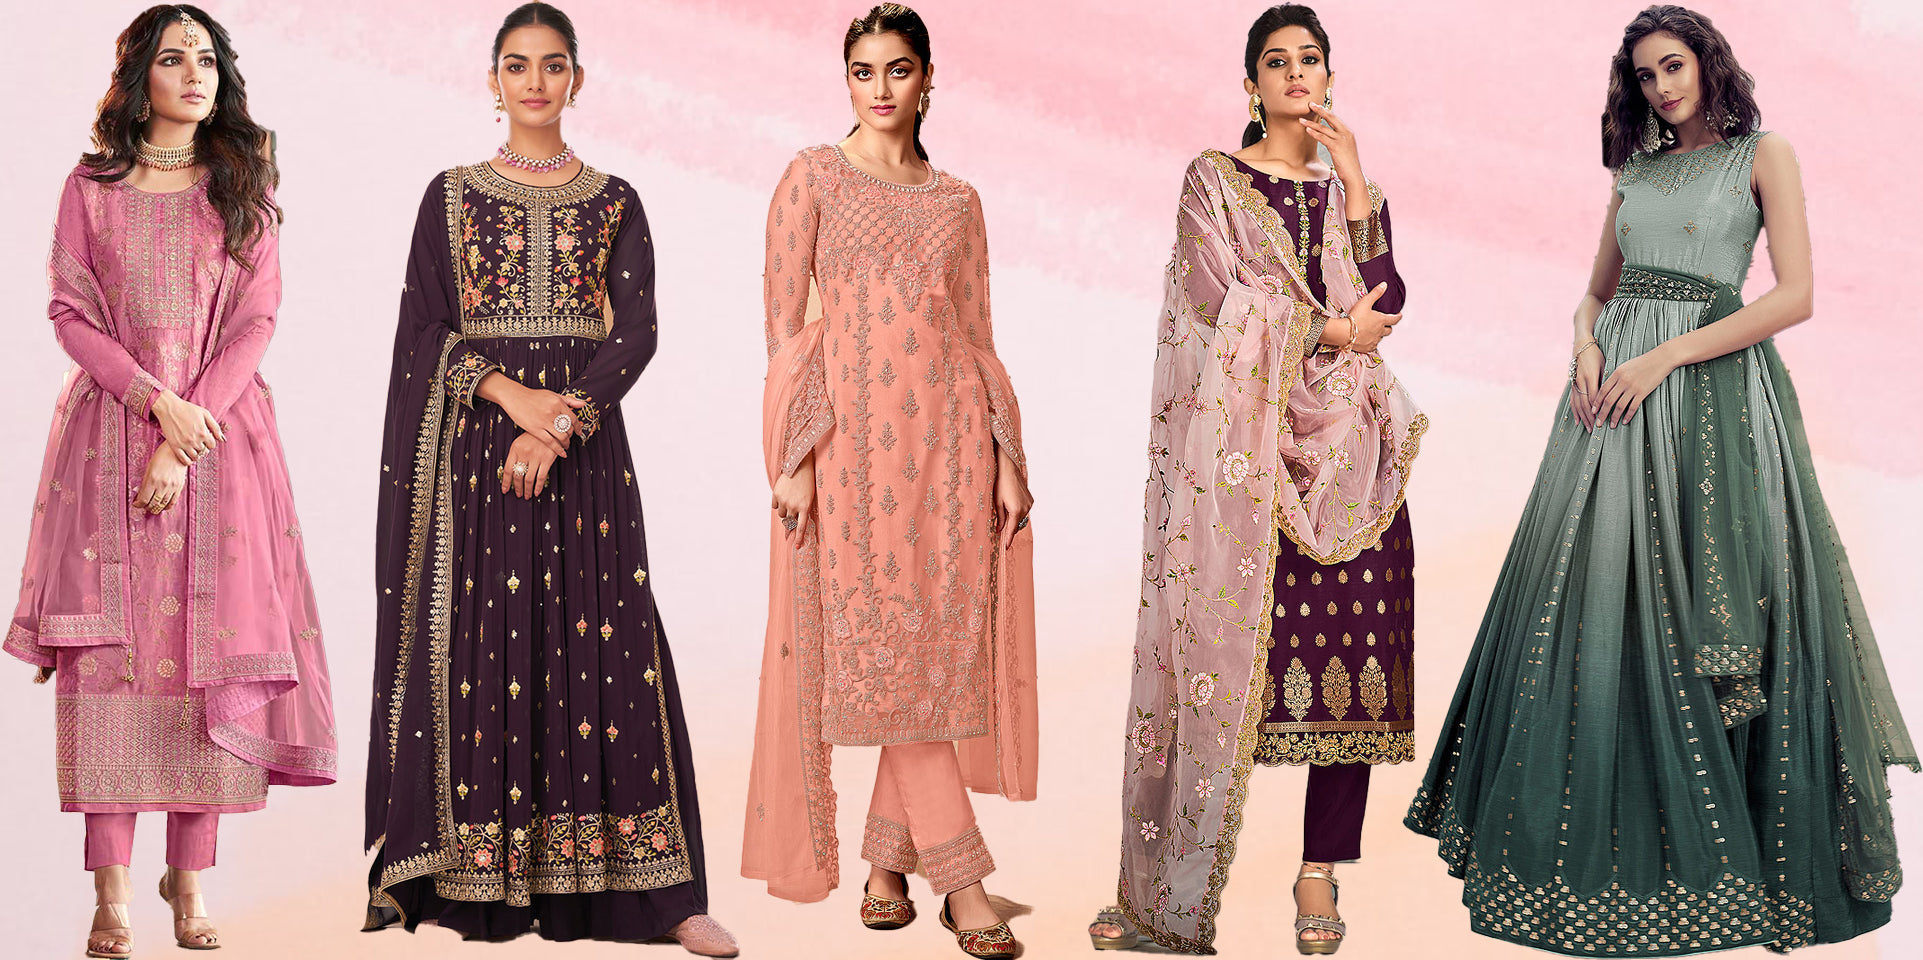 Look chic in Indian clothes!